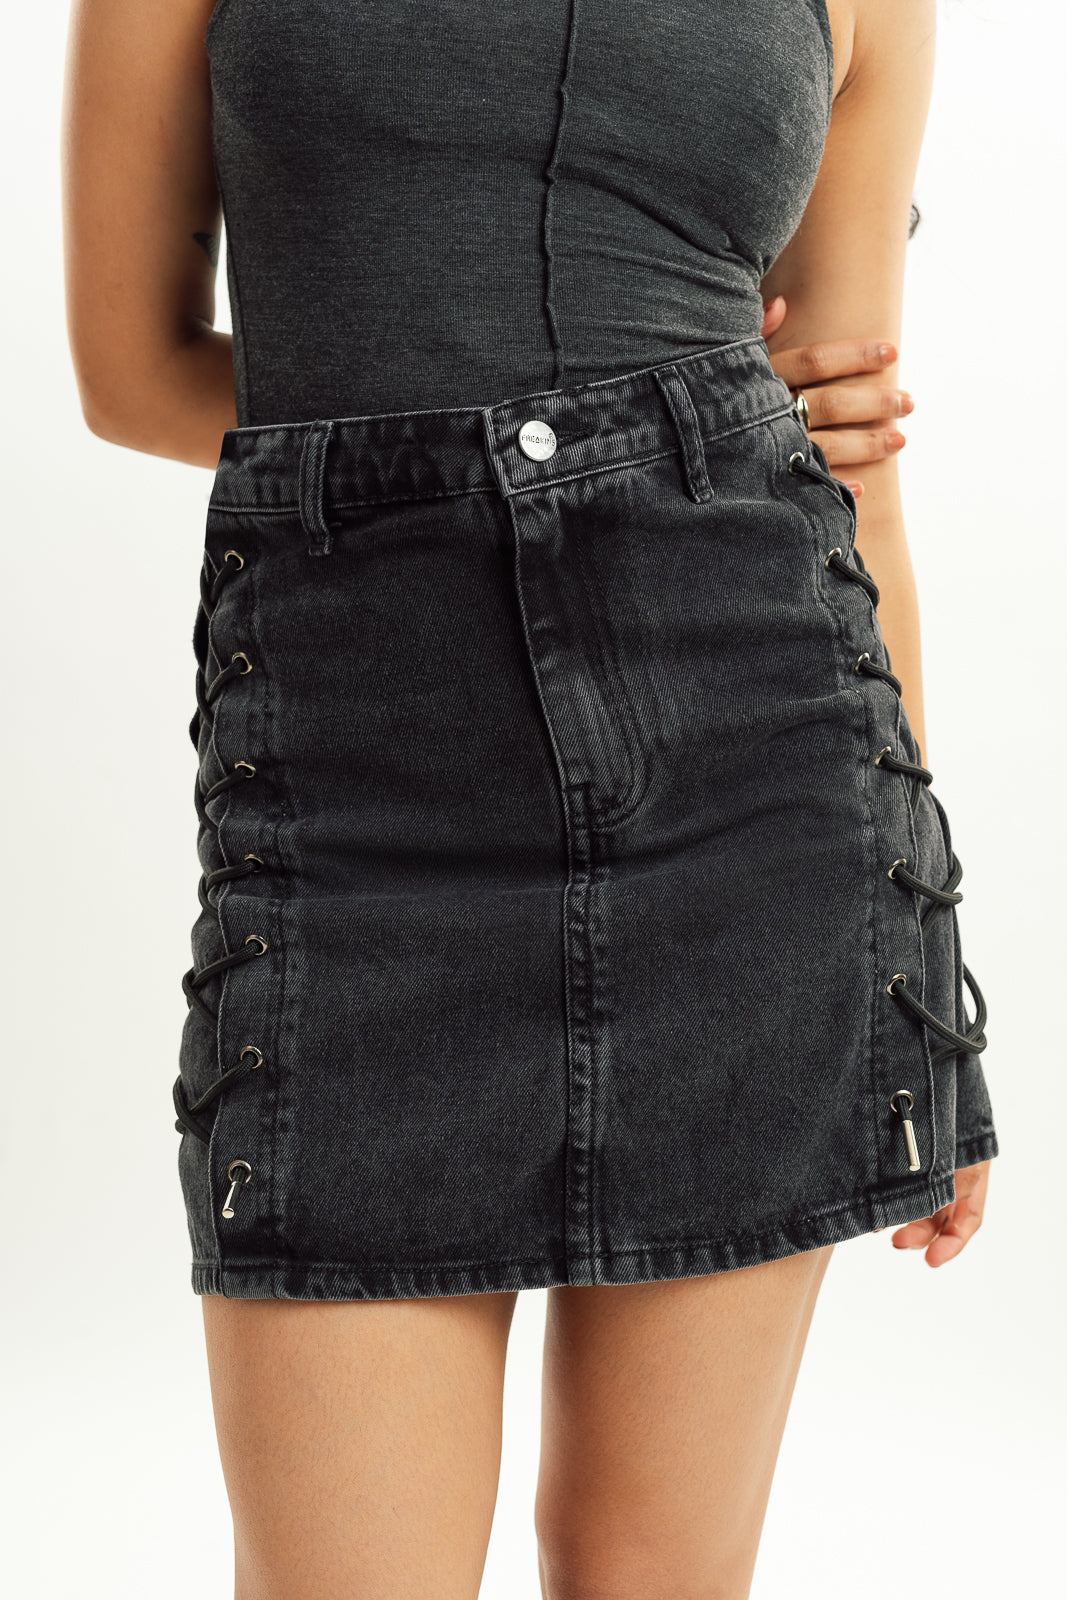 CHARCOAL STRING UP SKIRT